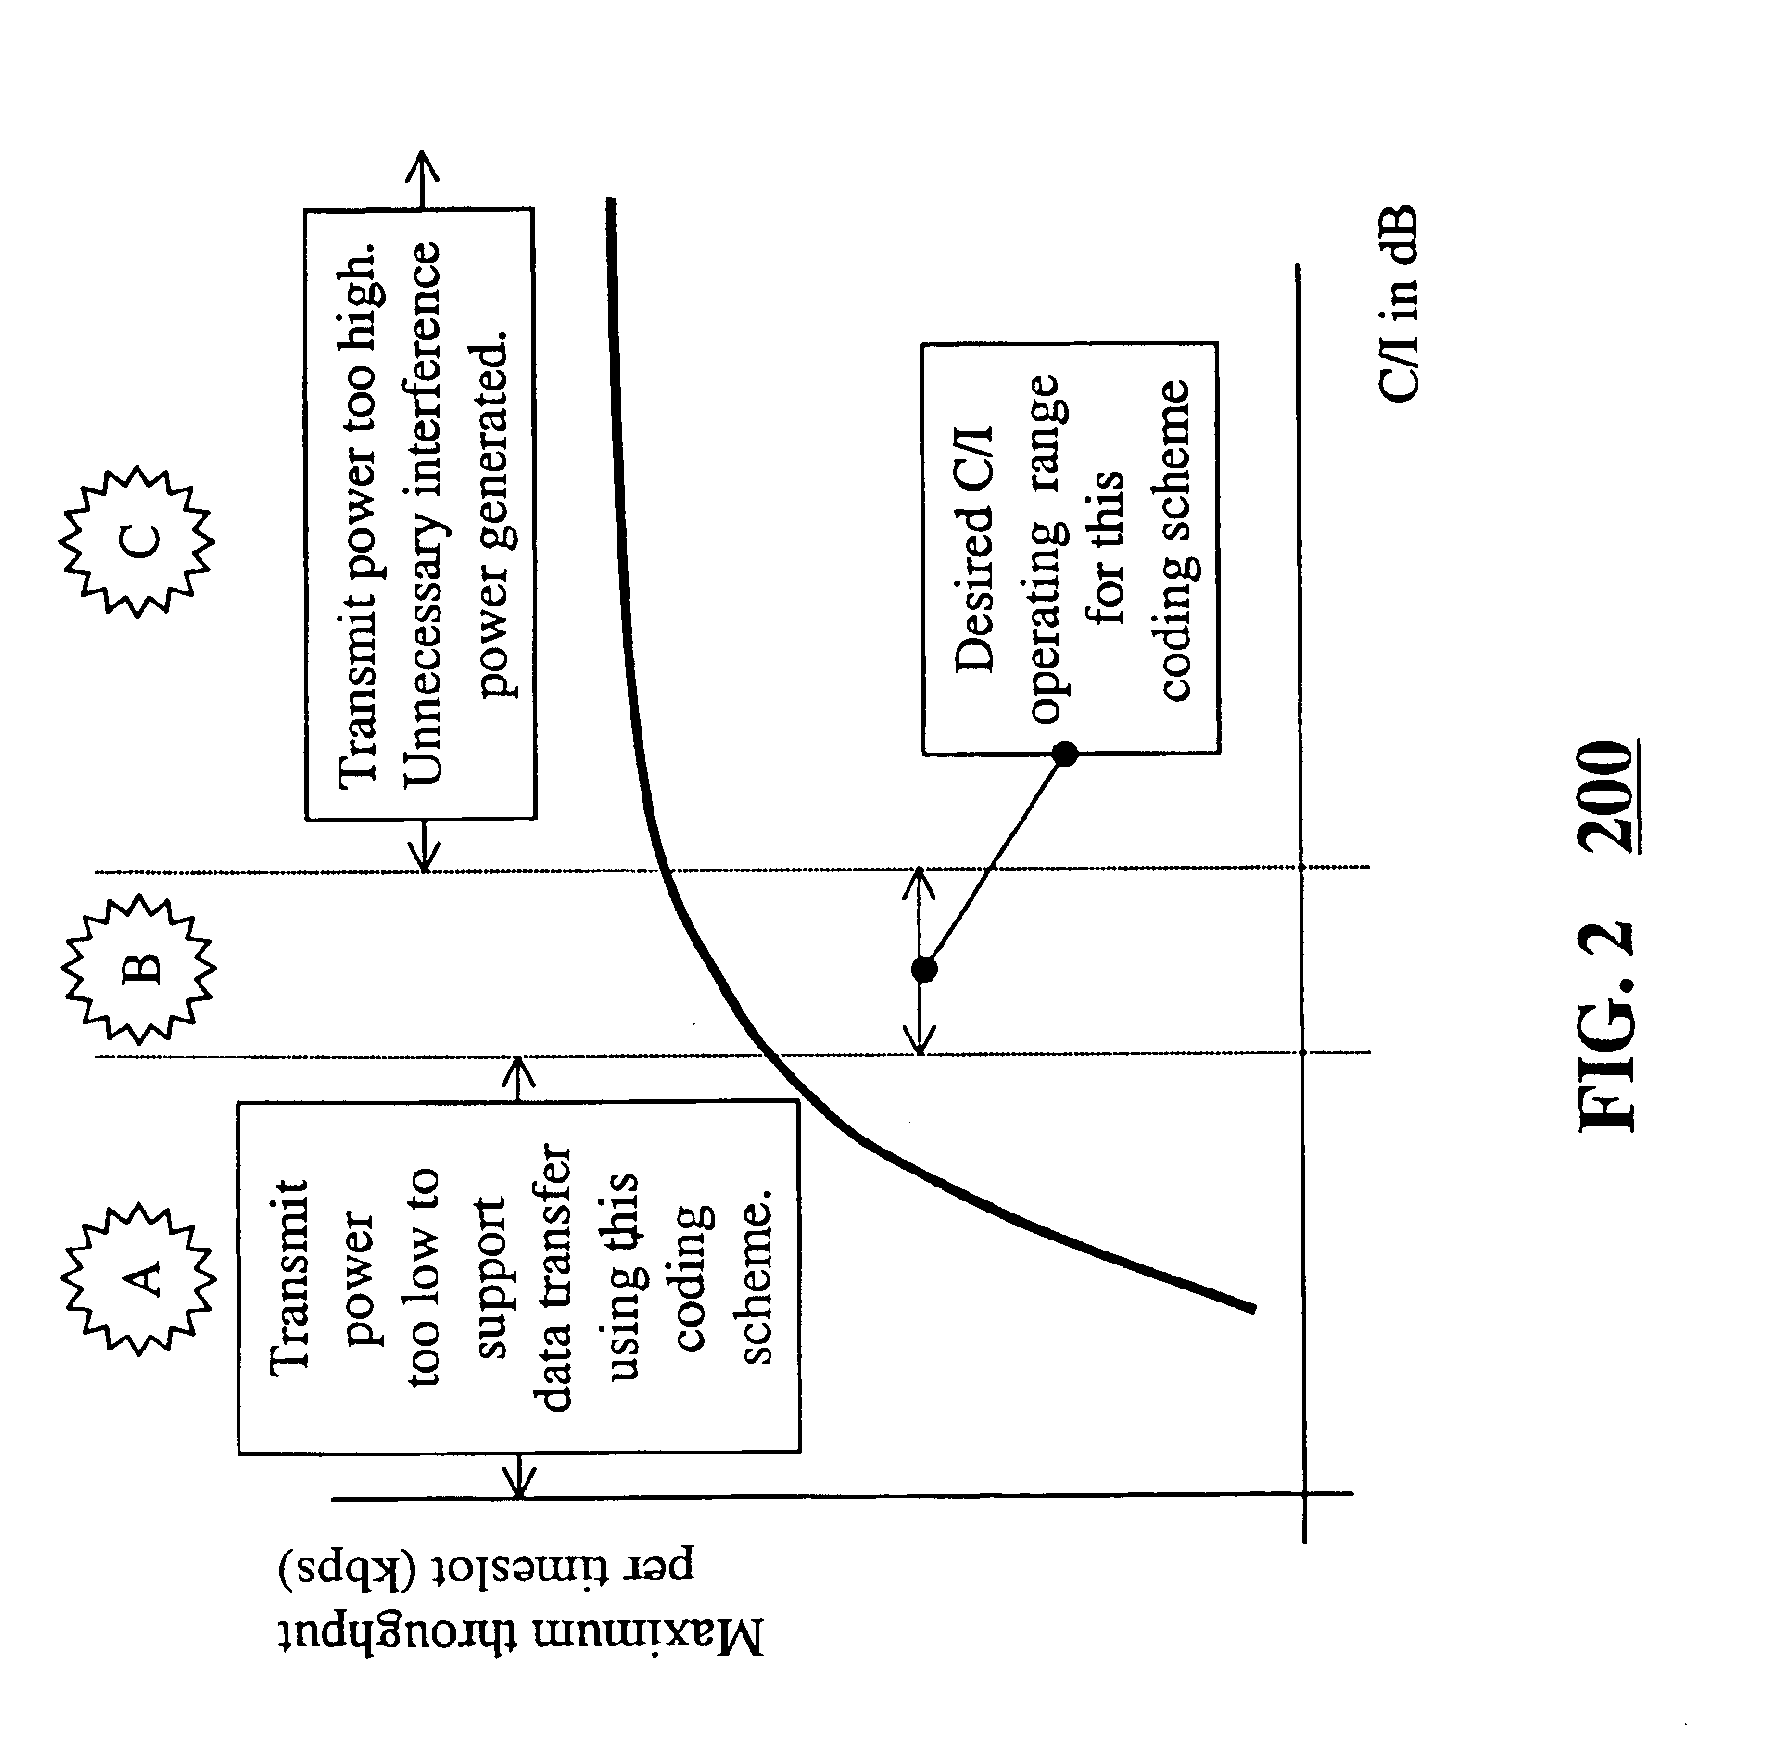 Downlink power control method for wireless packet data network